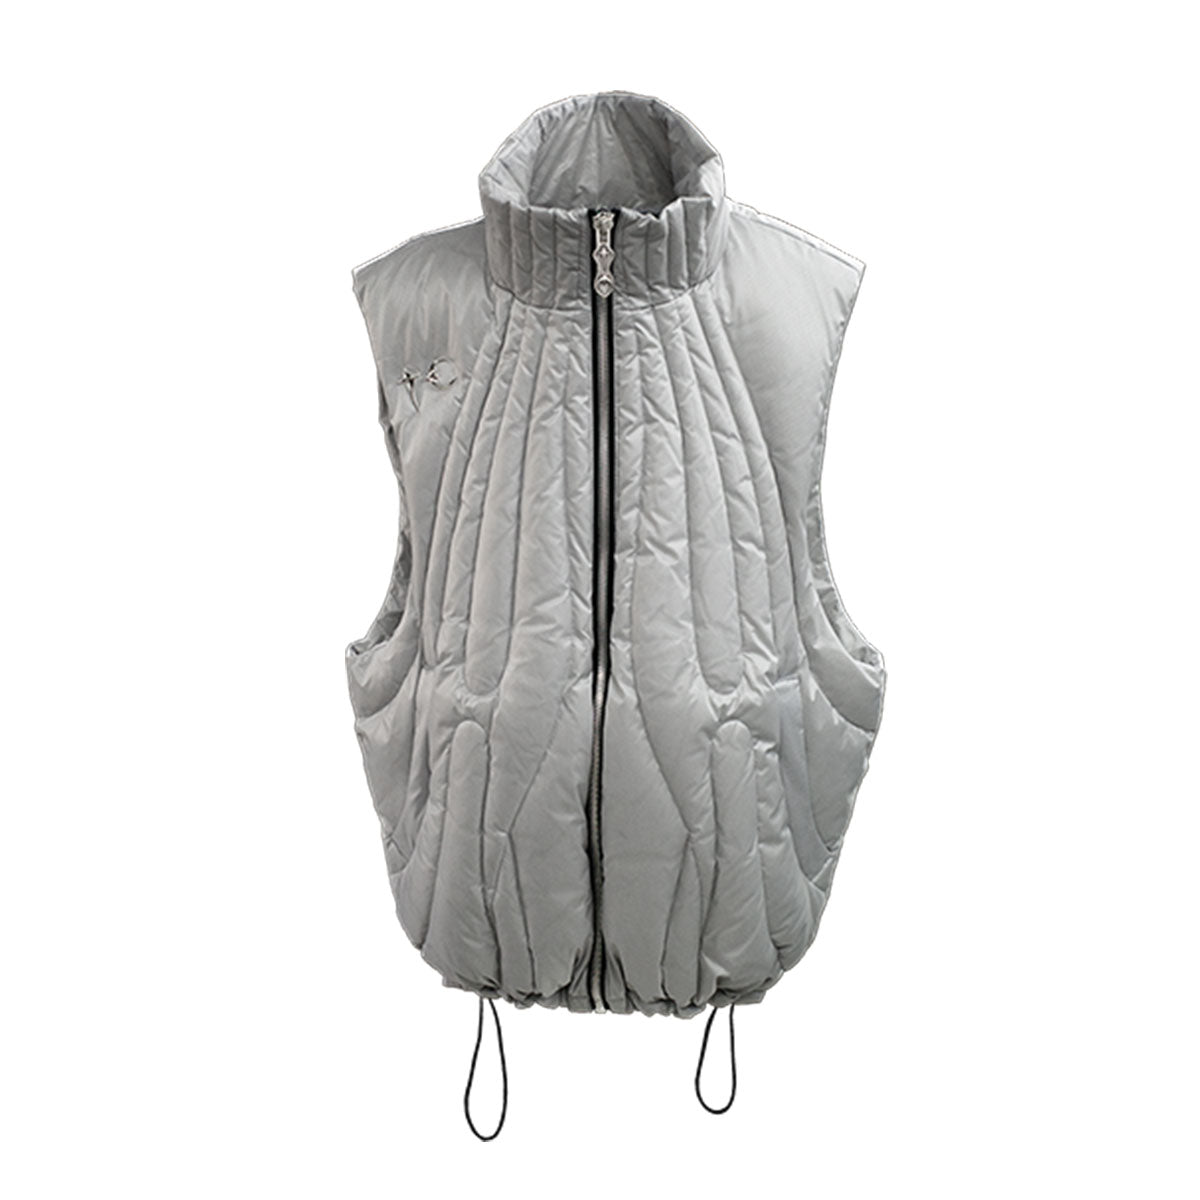 Cave goose down vest – Why are you here?